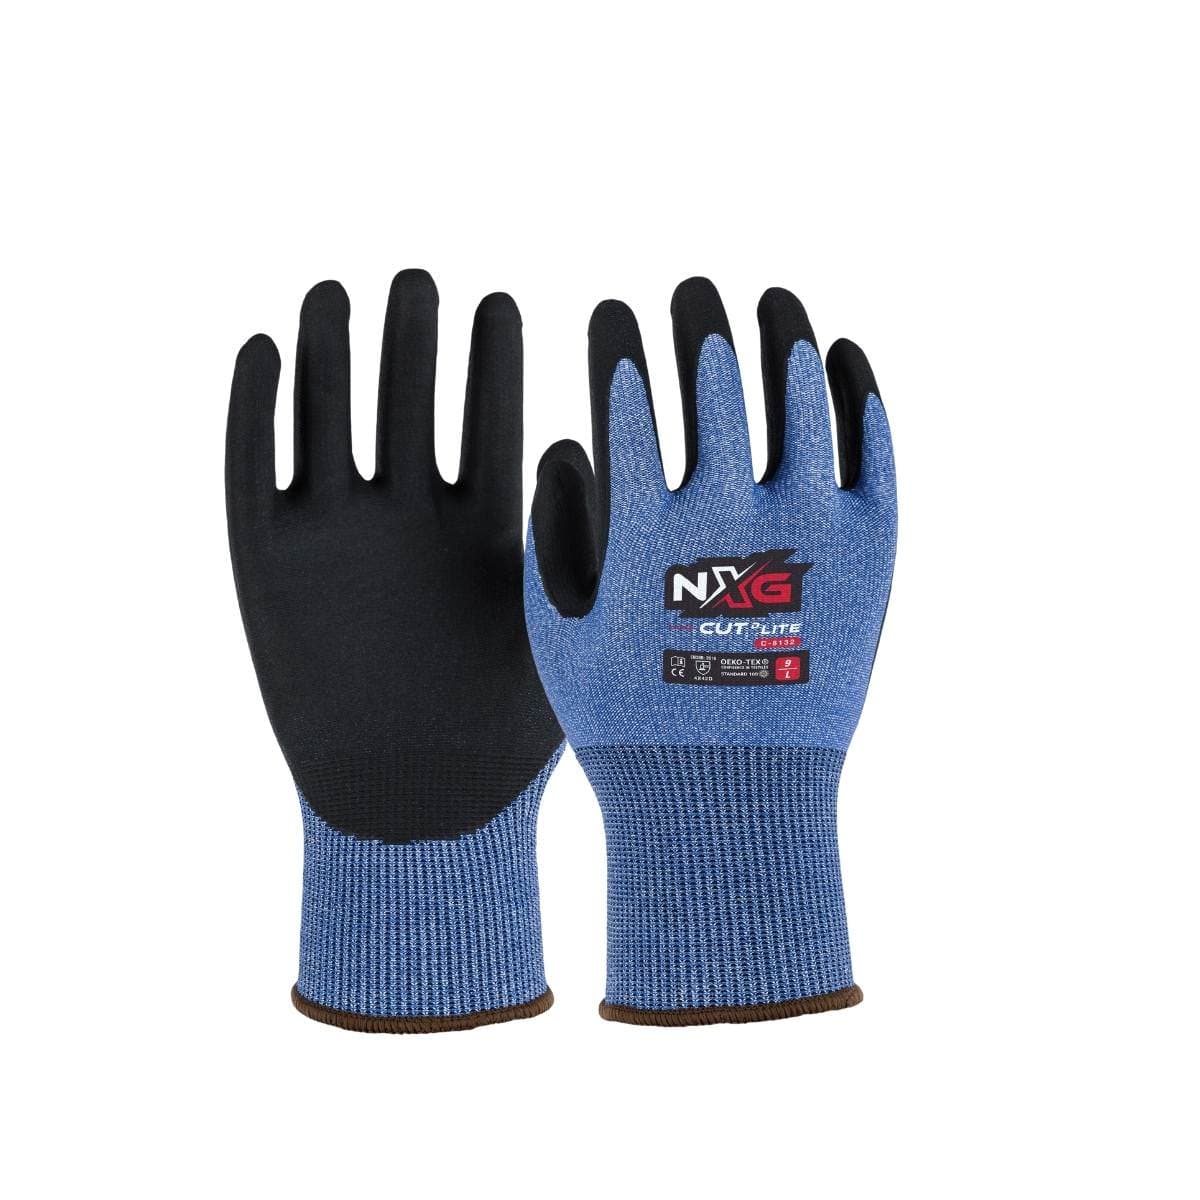 Holdfast High Performance Cut Resistant Glove – RIFFE Web Store